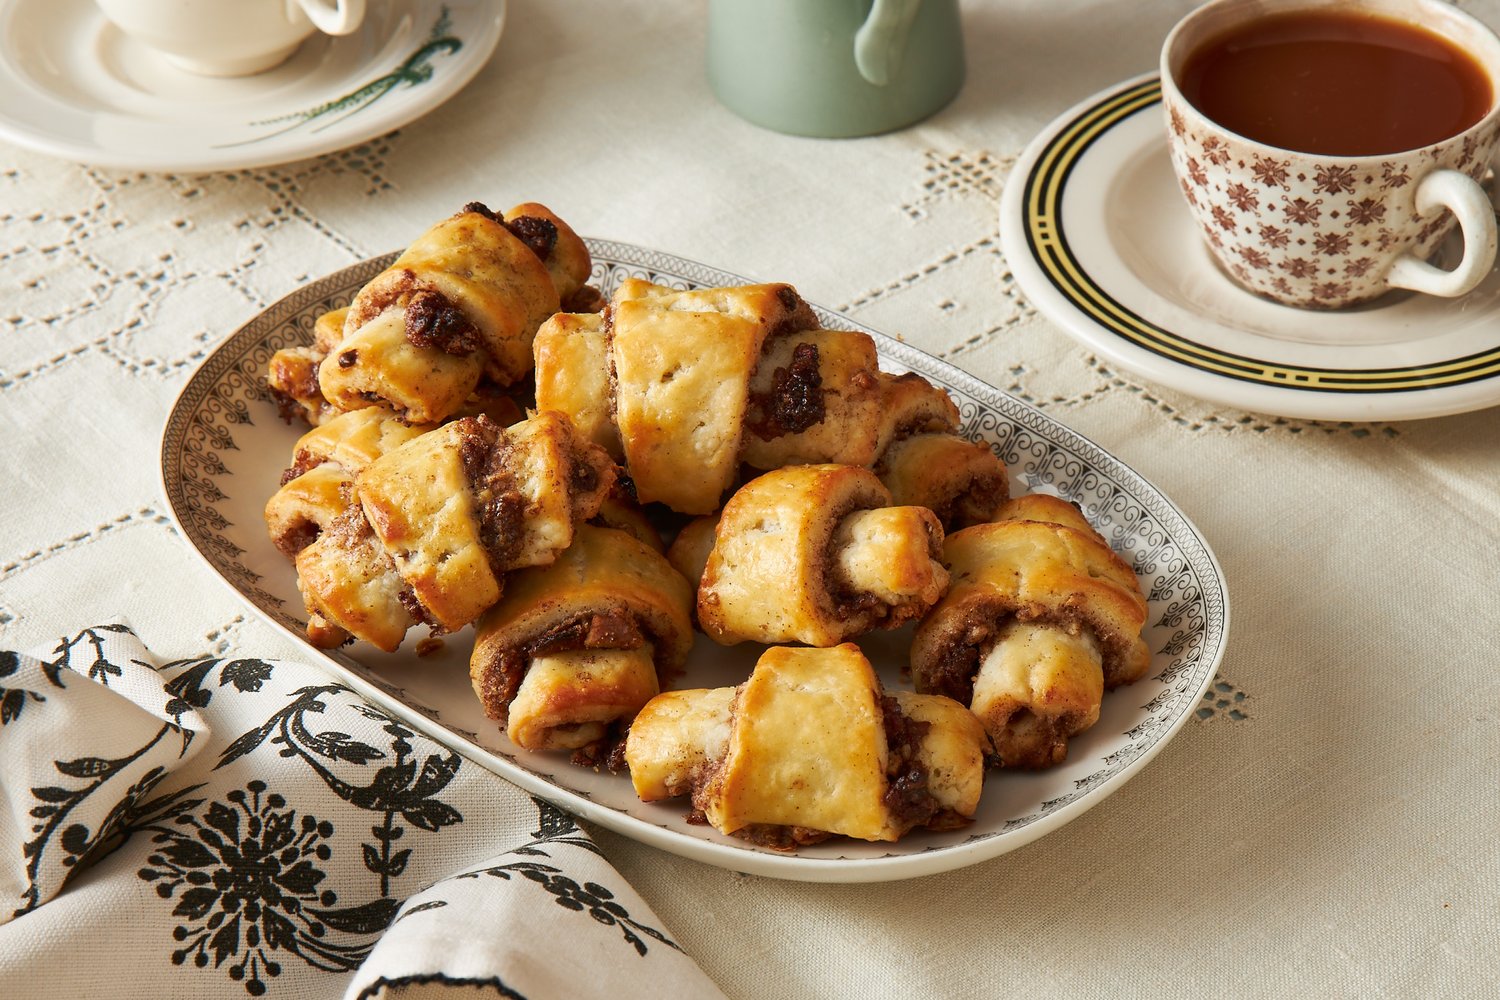 Rugelach pastries on oval tray atop cream tablecloth